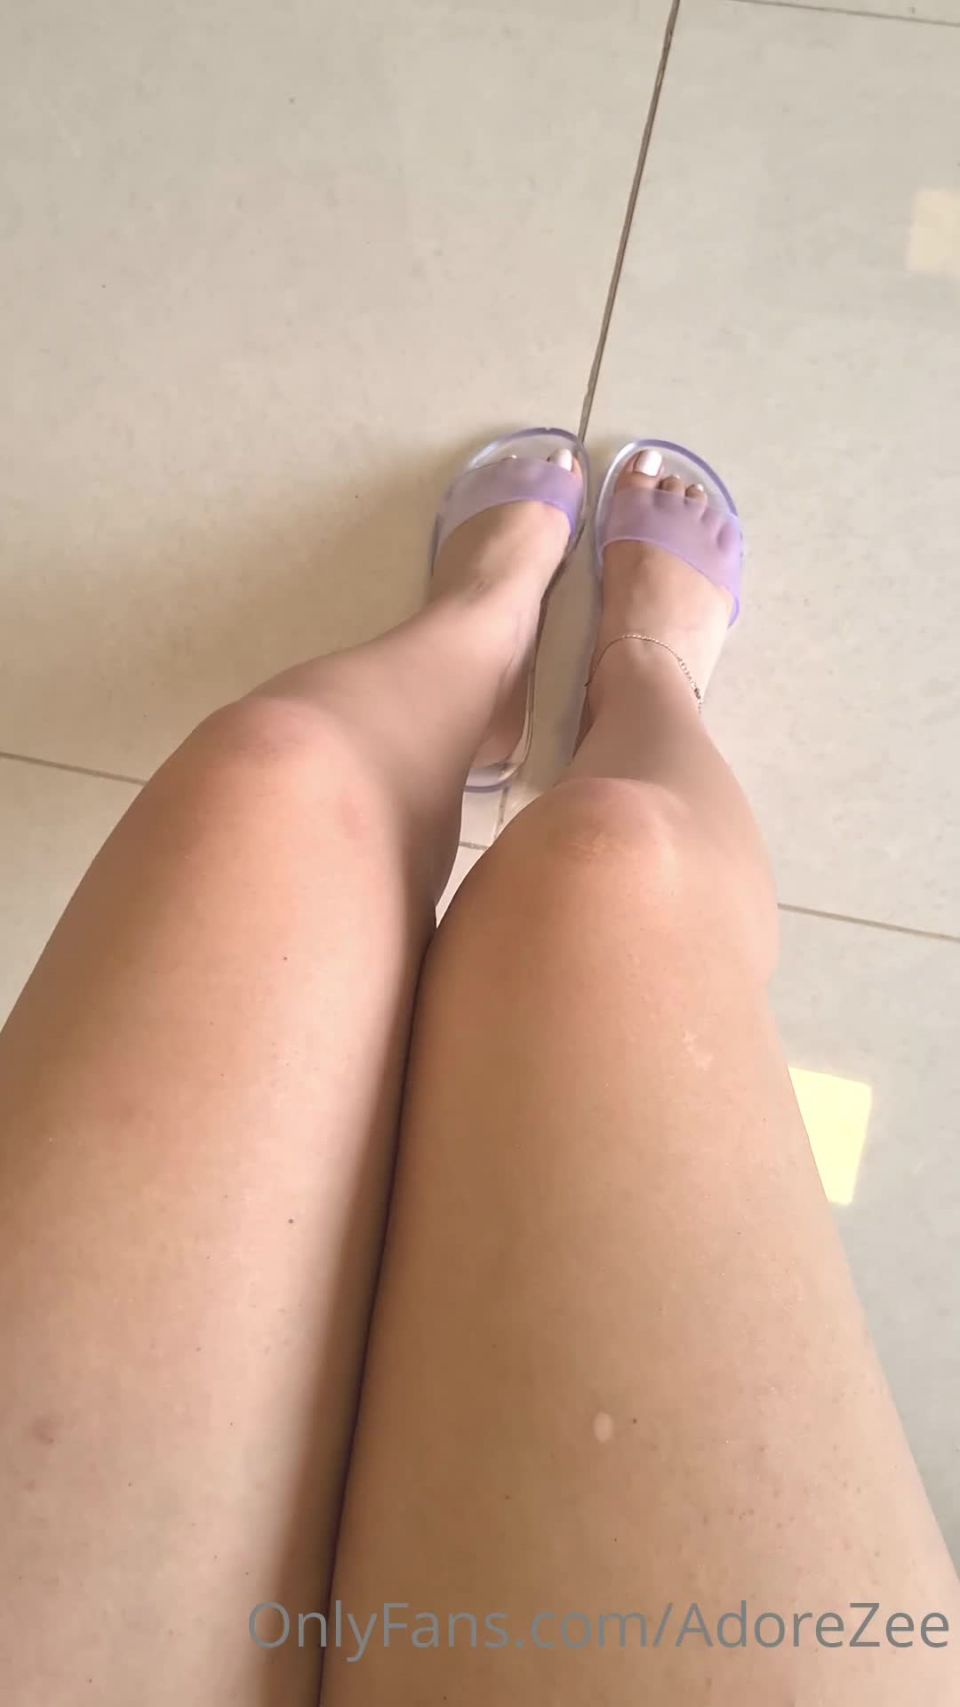 AdoreZee () Adorezee - dangling my new transparent sandals who wants to see it full of cum after a nice footjob 17-01-2022